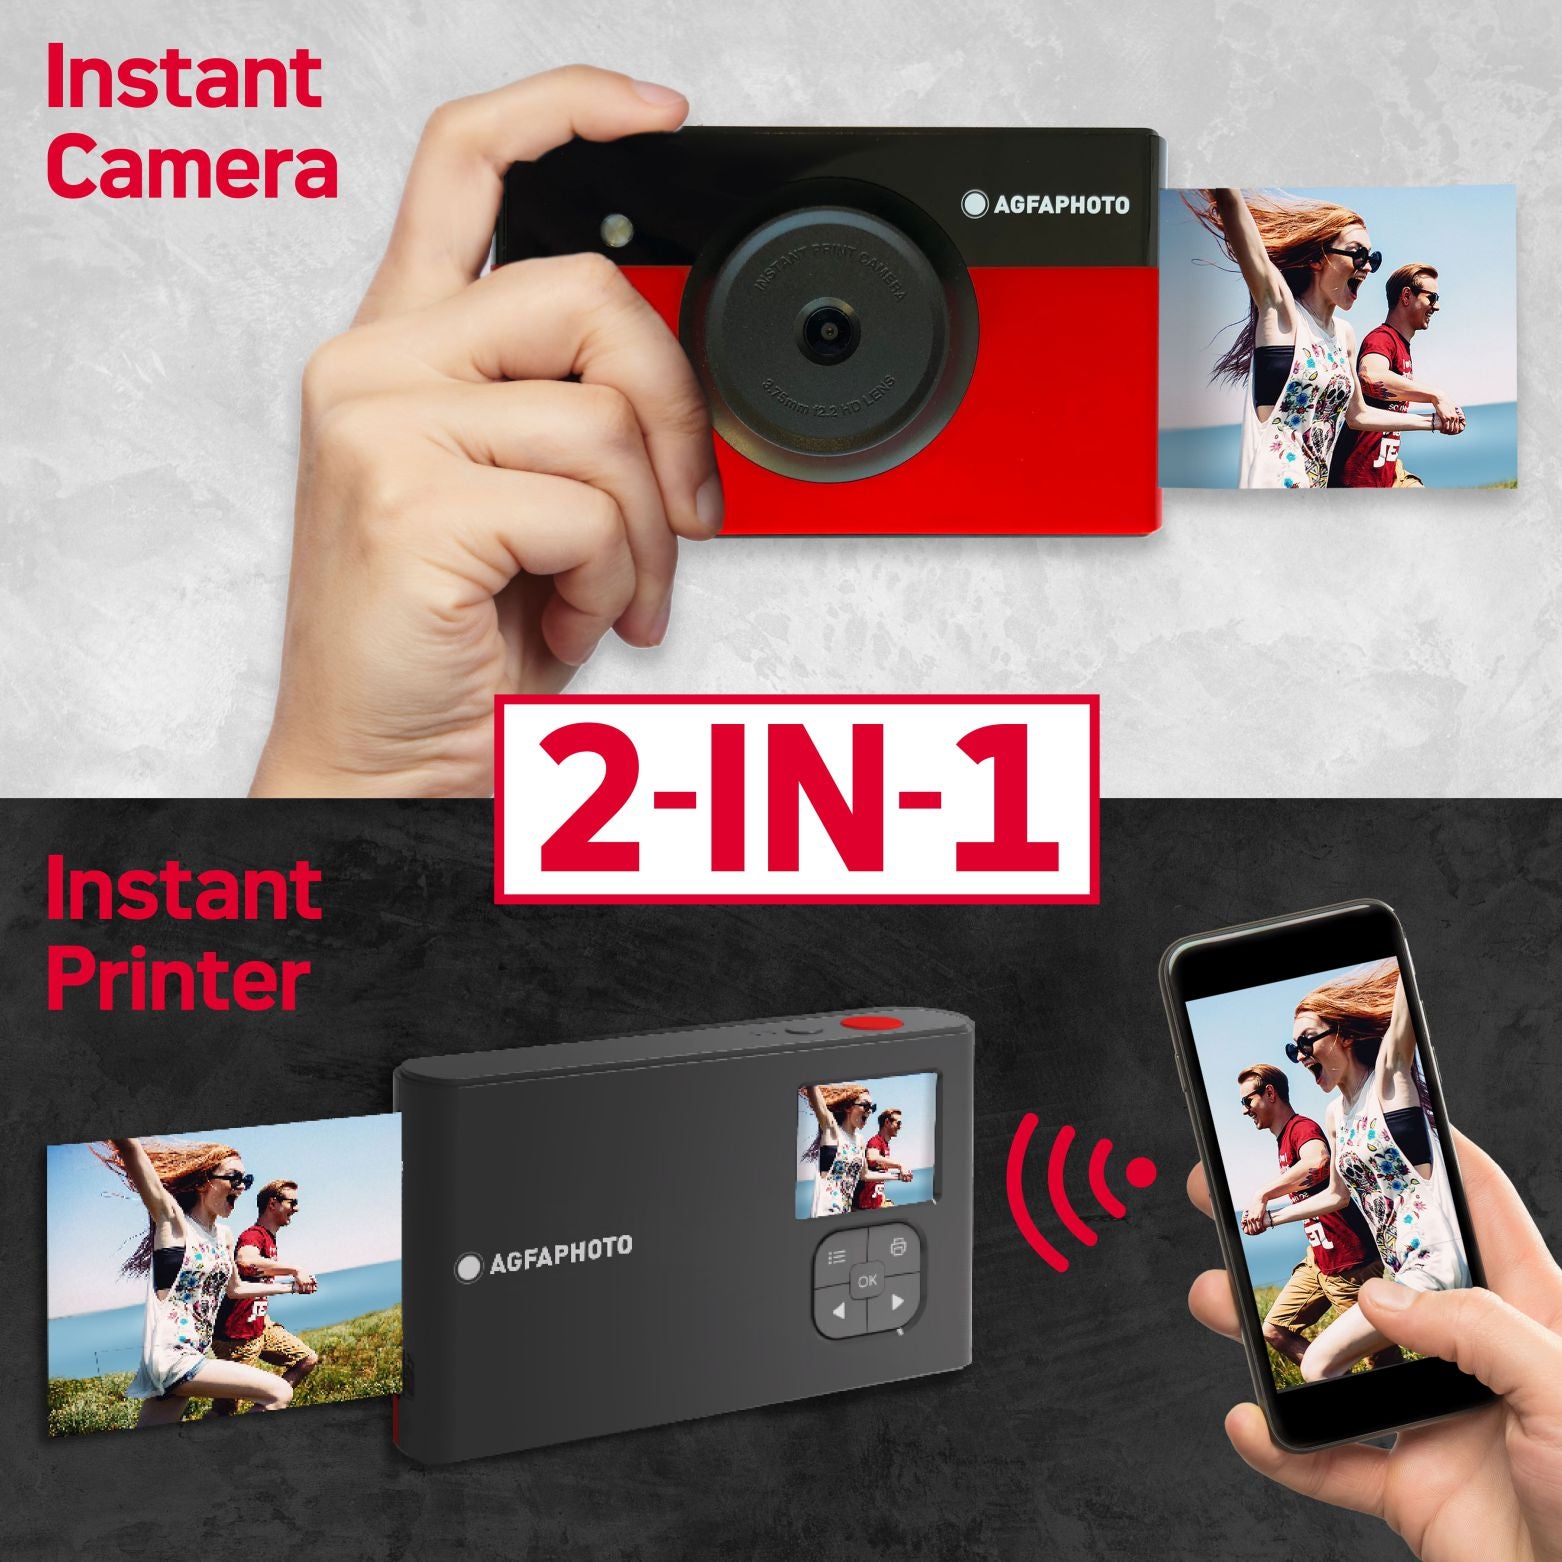 AgfaPhoto Realipix Mini S 10MP Instant Print Digital Photo Camera also prints the photos instantly and connects to your phone